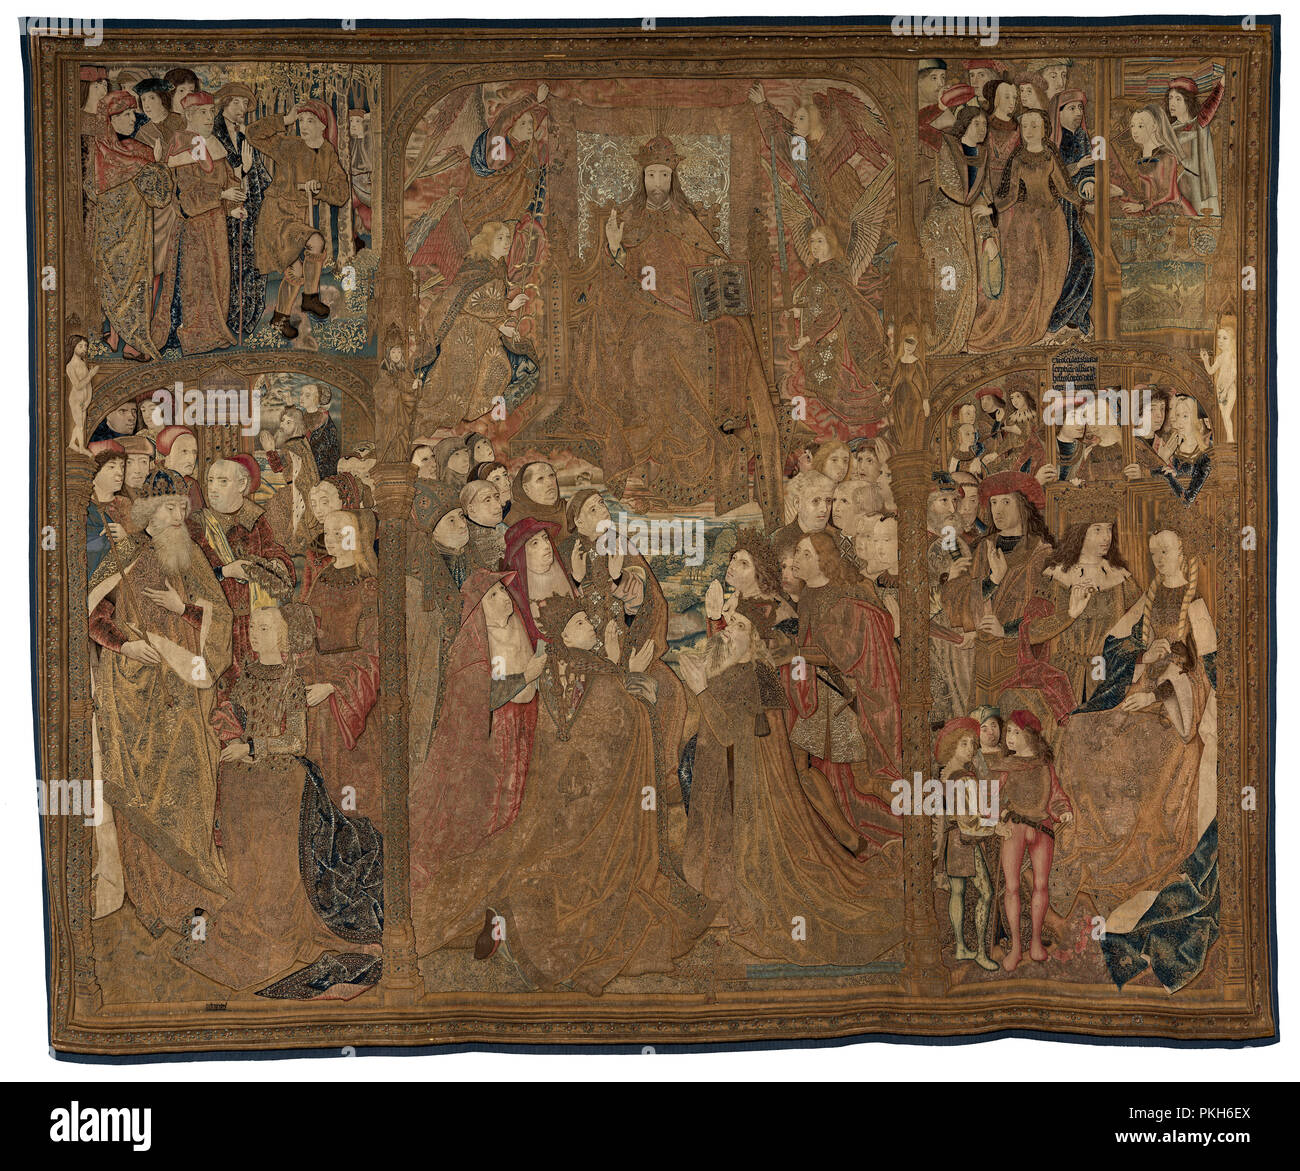 The Triumph of Christ ('The Mazarin Tapestry'). Dated: c. 1500. Dimensions: overall: 341 x 439.4 cm (134 1/4 x 173 in.). Medium: tapestry: undyed wool warp; dyed wool, silk, and silver-gilt- and silver-wrapped silk weft. Museum: National Gallery of Art, Washington DC. Author: Netherlandish 16th Century. Stock Photo